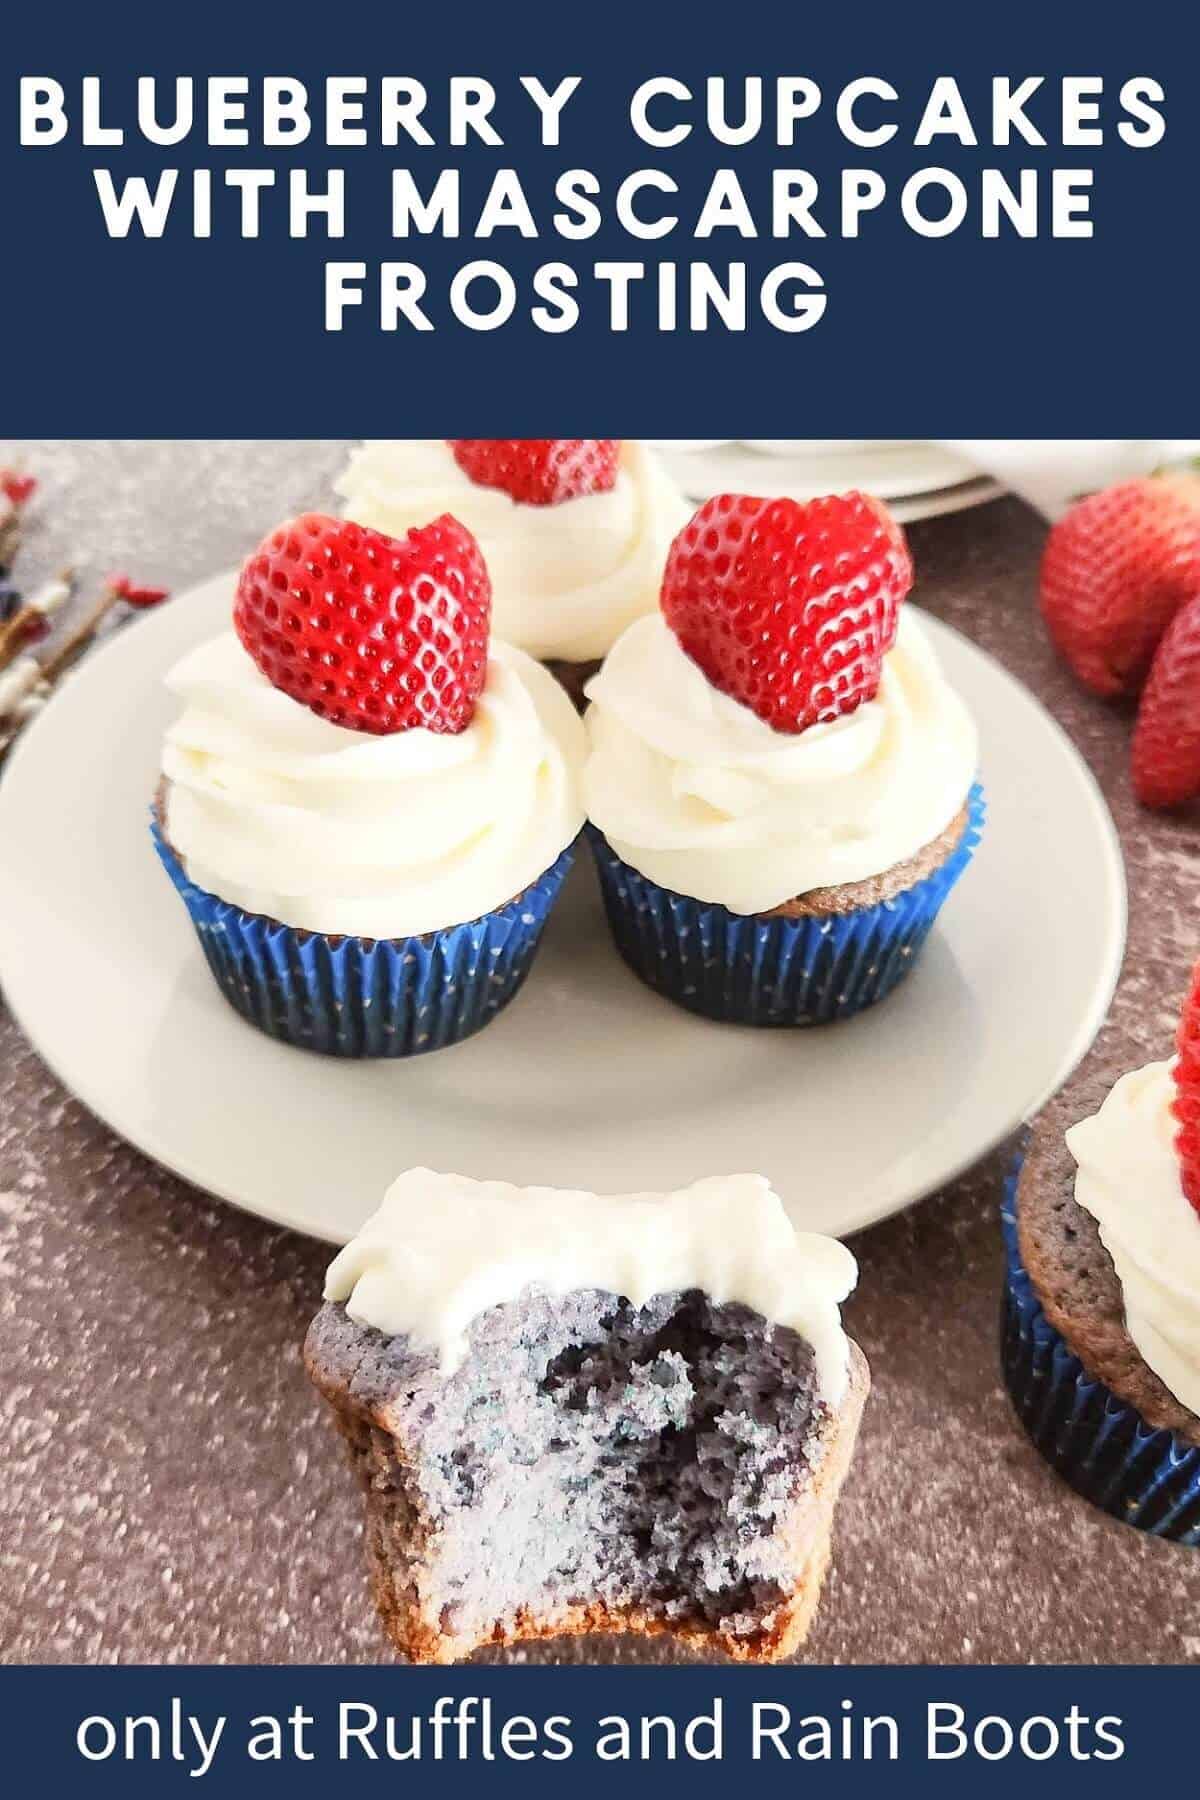 A plate of blueberry cupcakes with mascarpone frosting and fresh strawberries on top next to a blueberry cupcake with a bite taken out against a brown background.